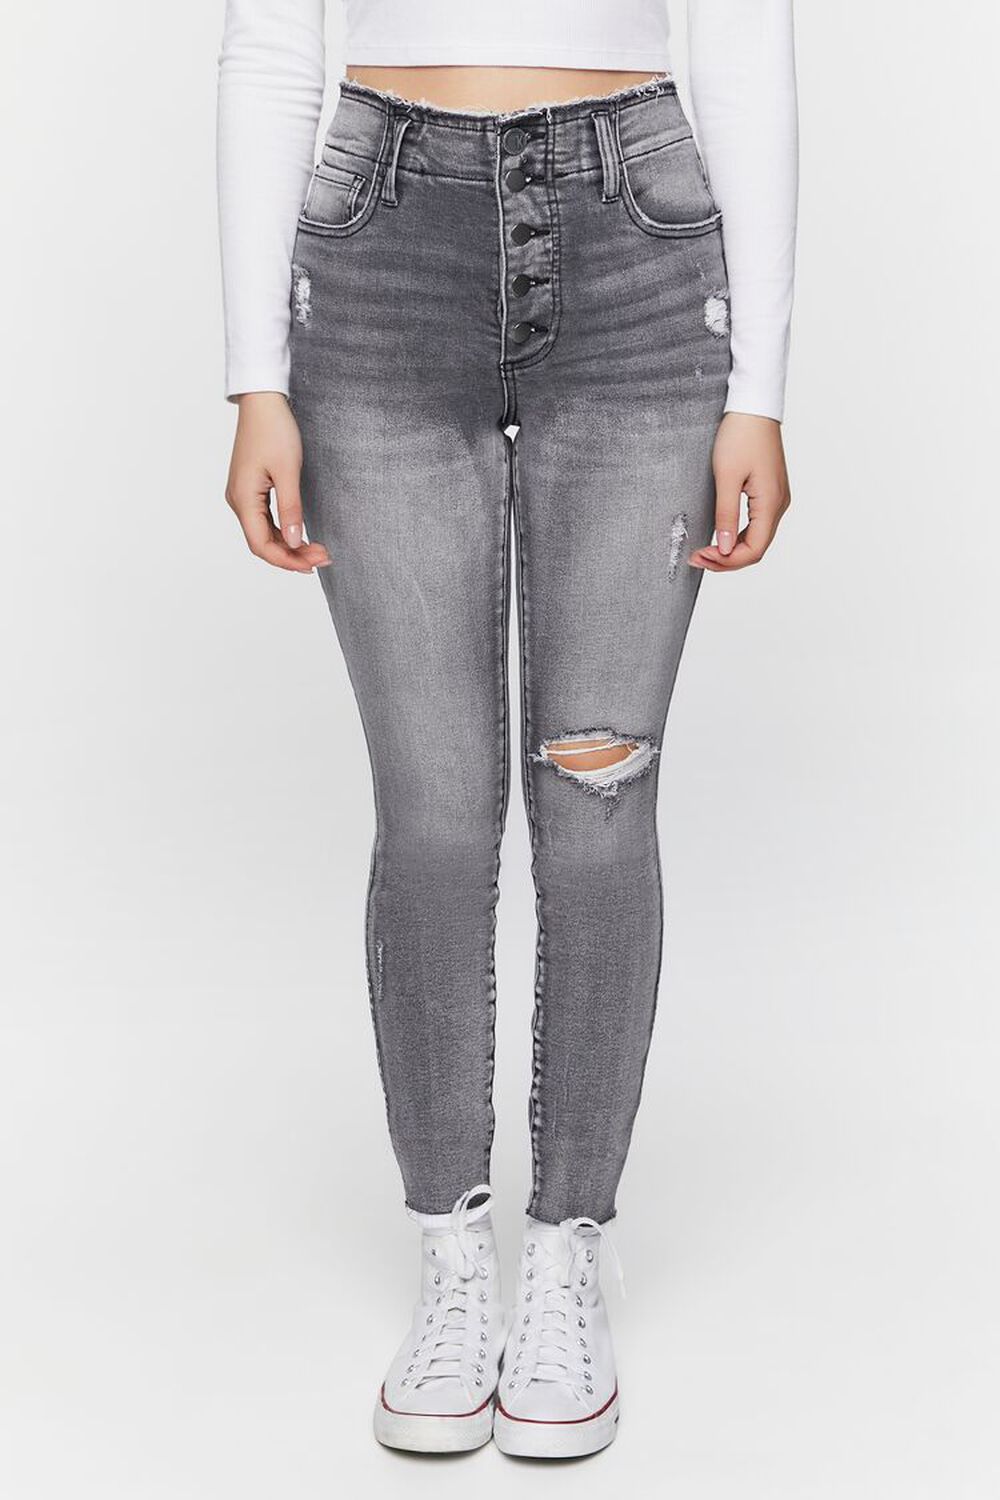 DENIM WASHED Distressed High-Rise Skinny Jeans, image 1